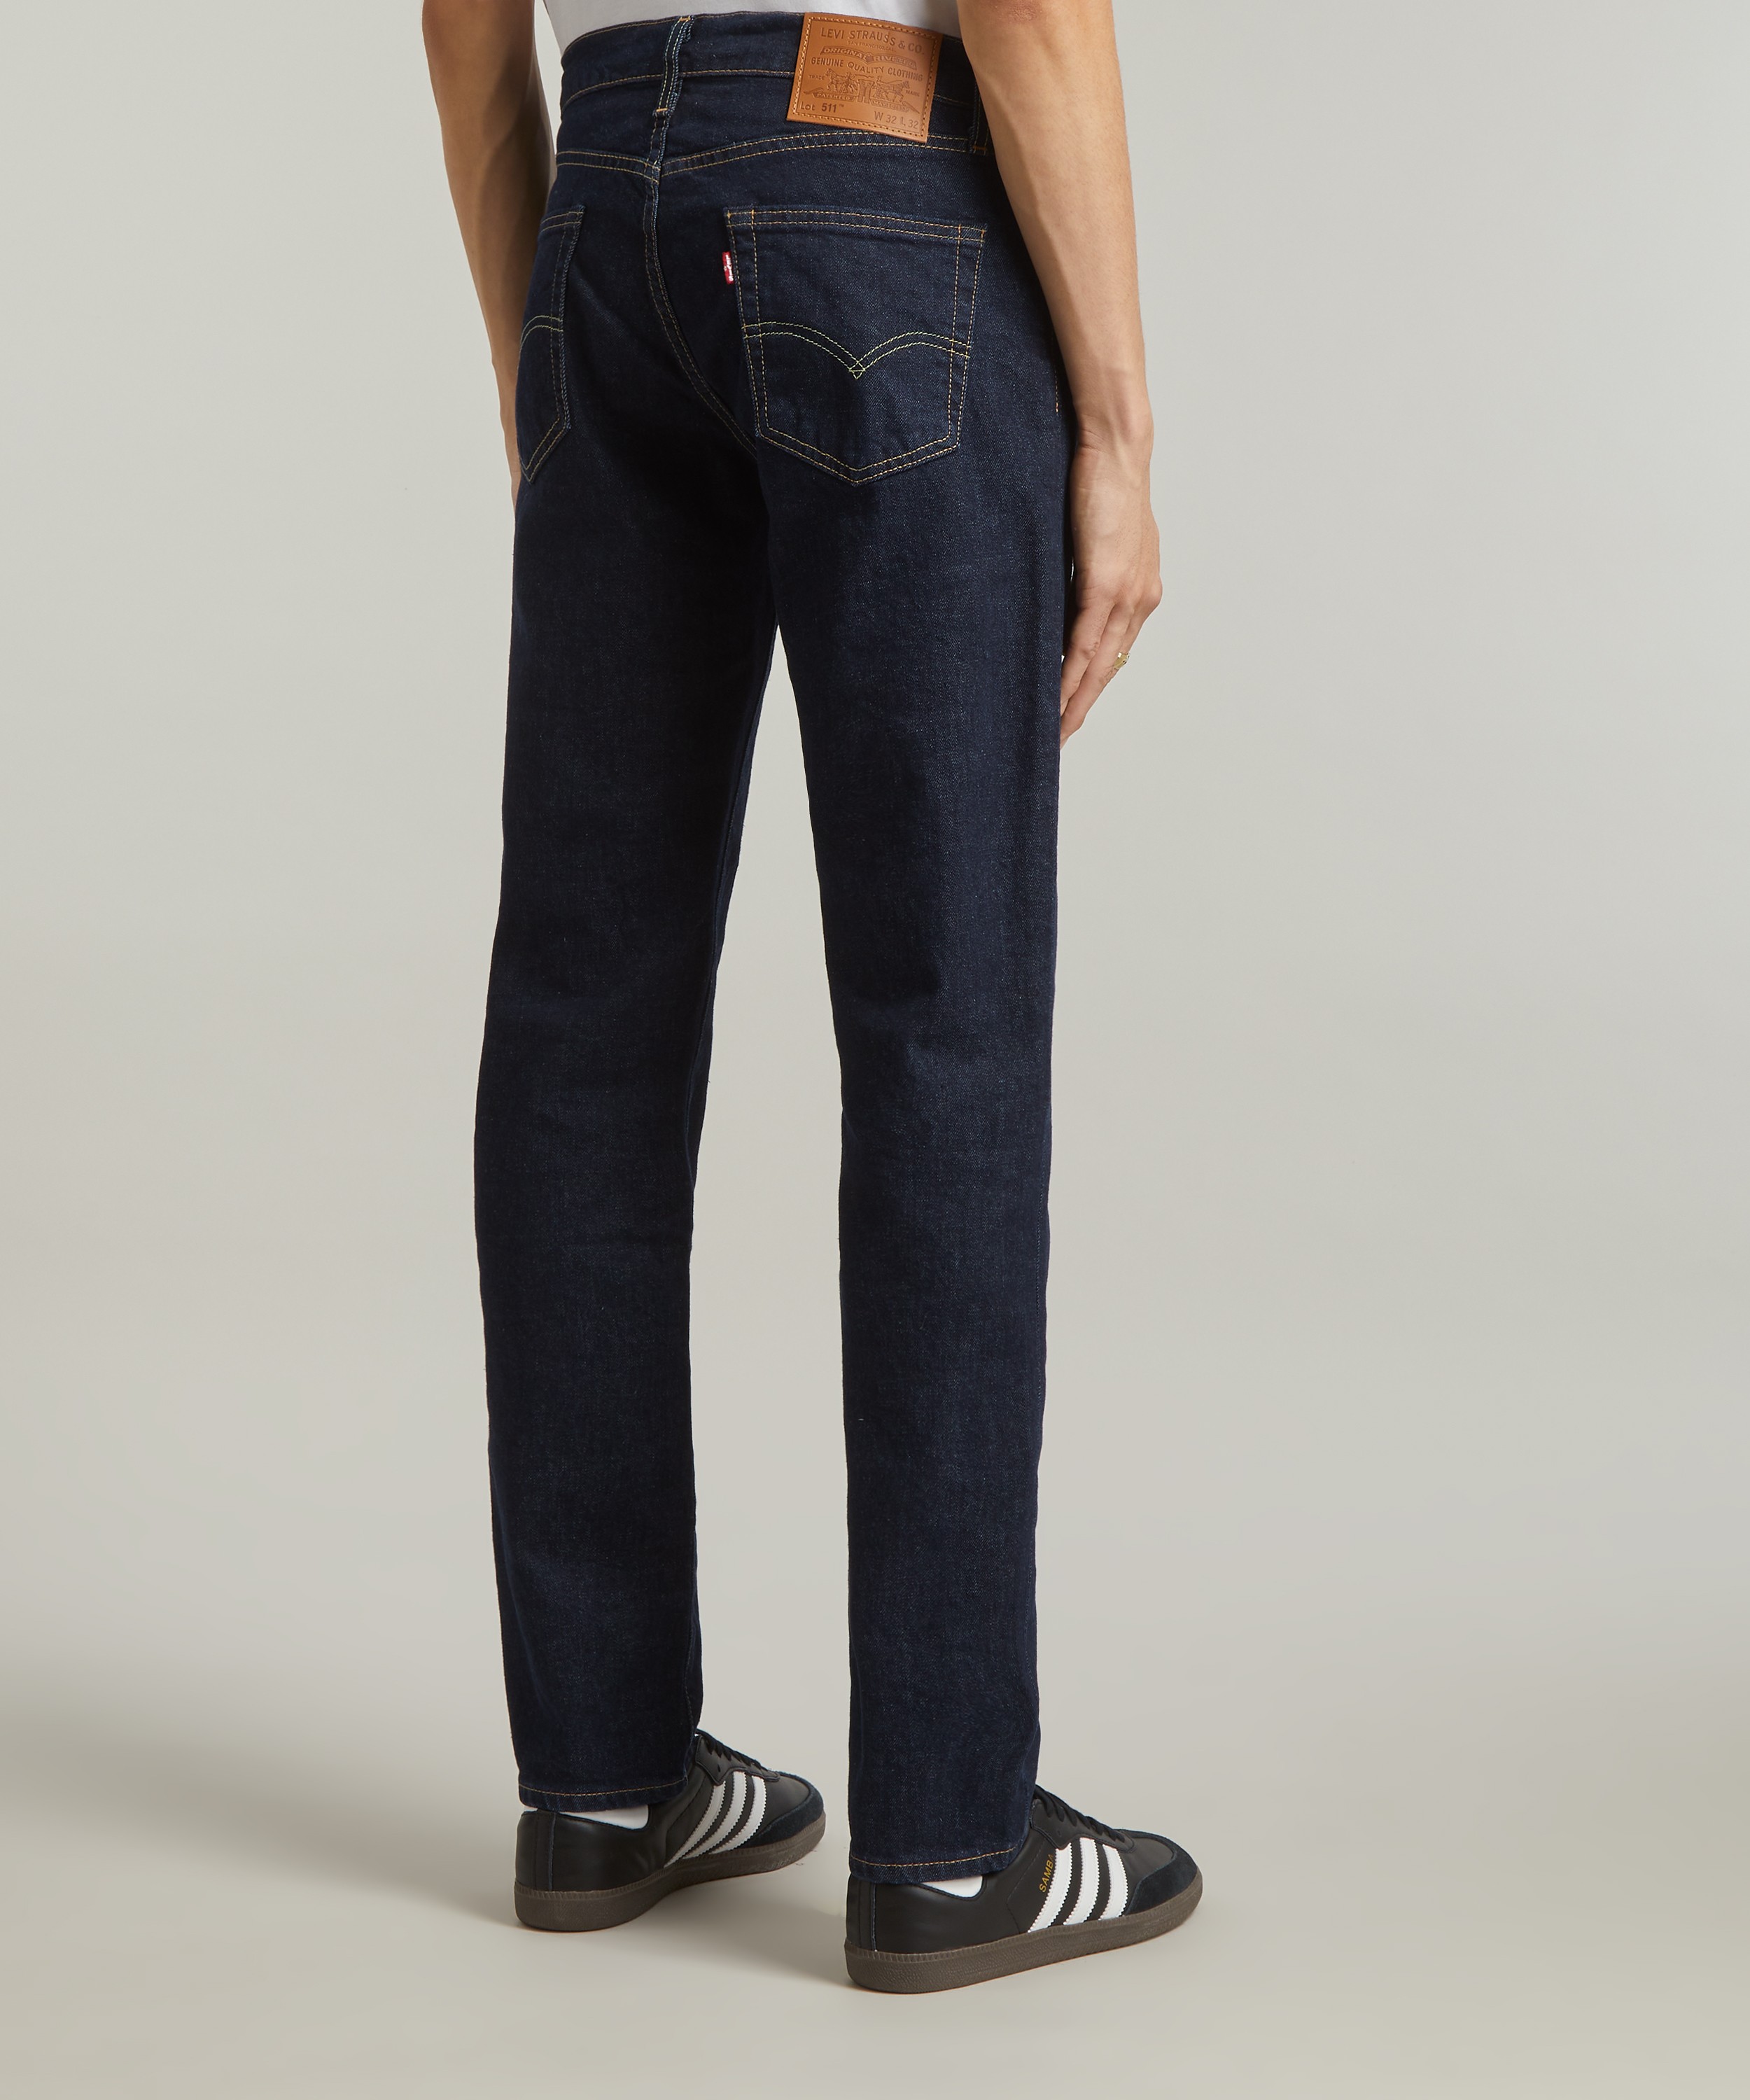 Levi's Made & Crafted - 511 Slim Rock Cod Jeans image number 3